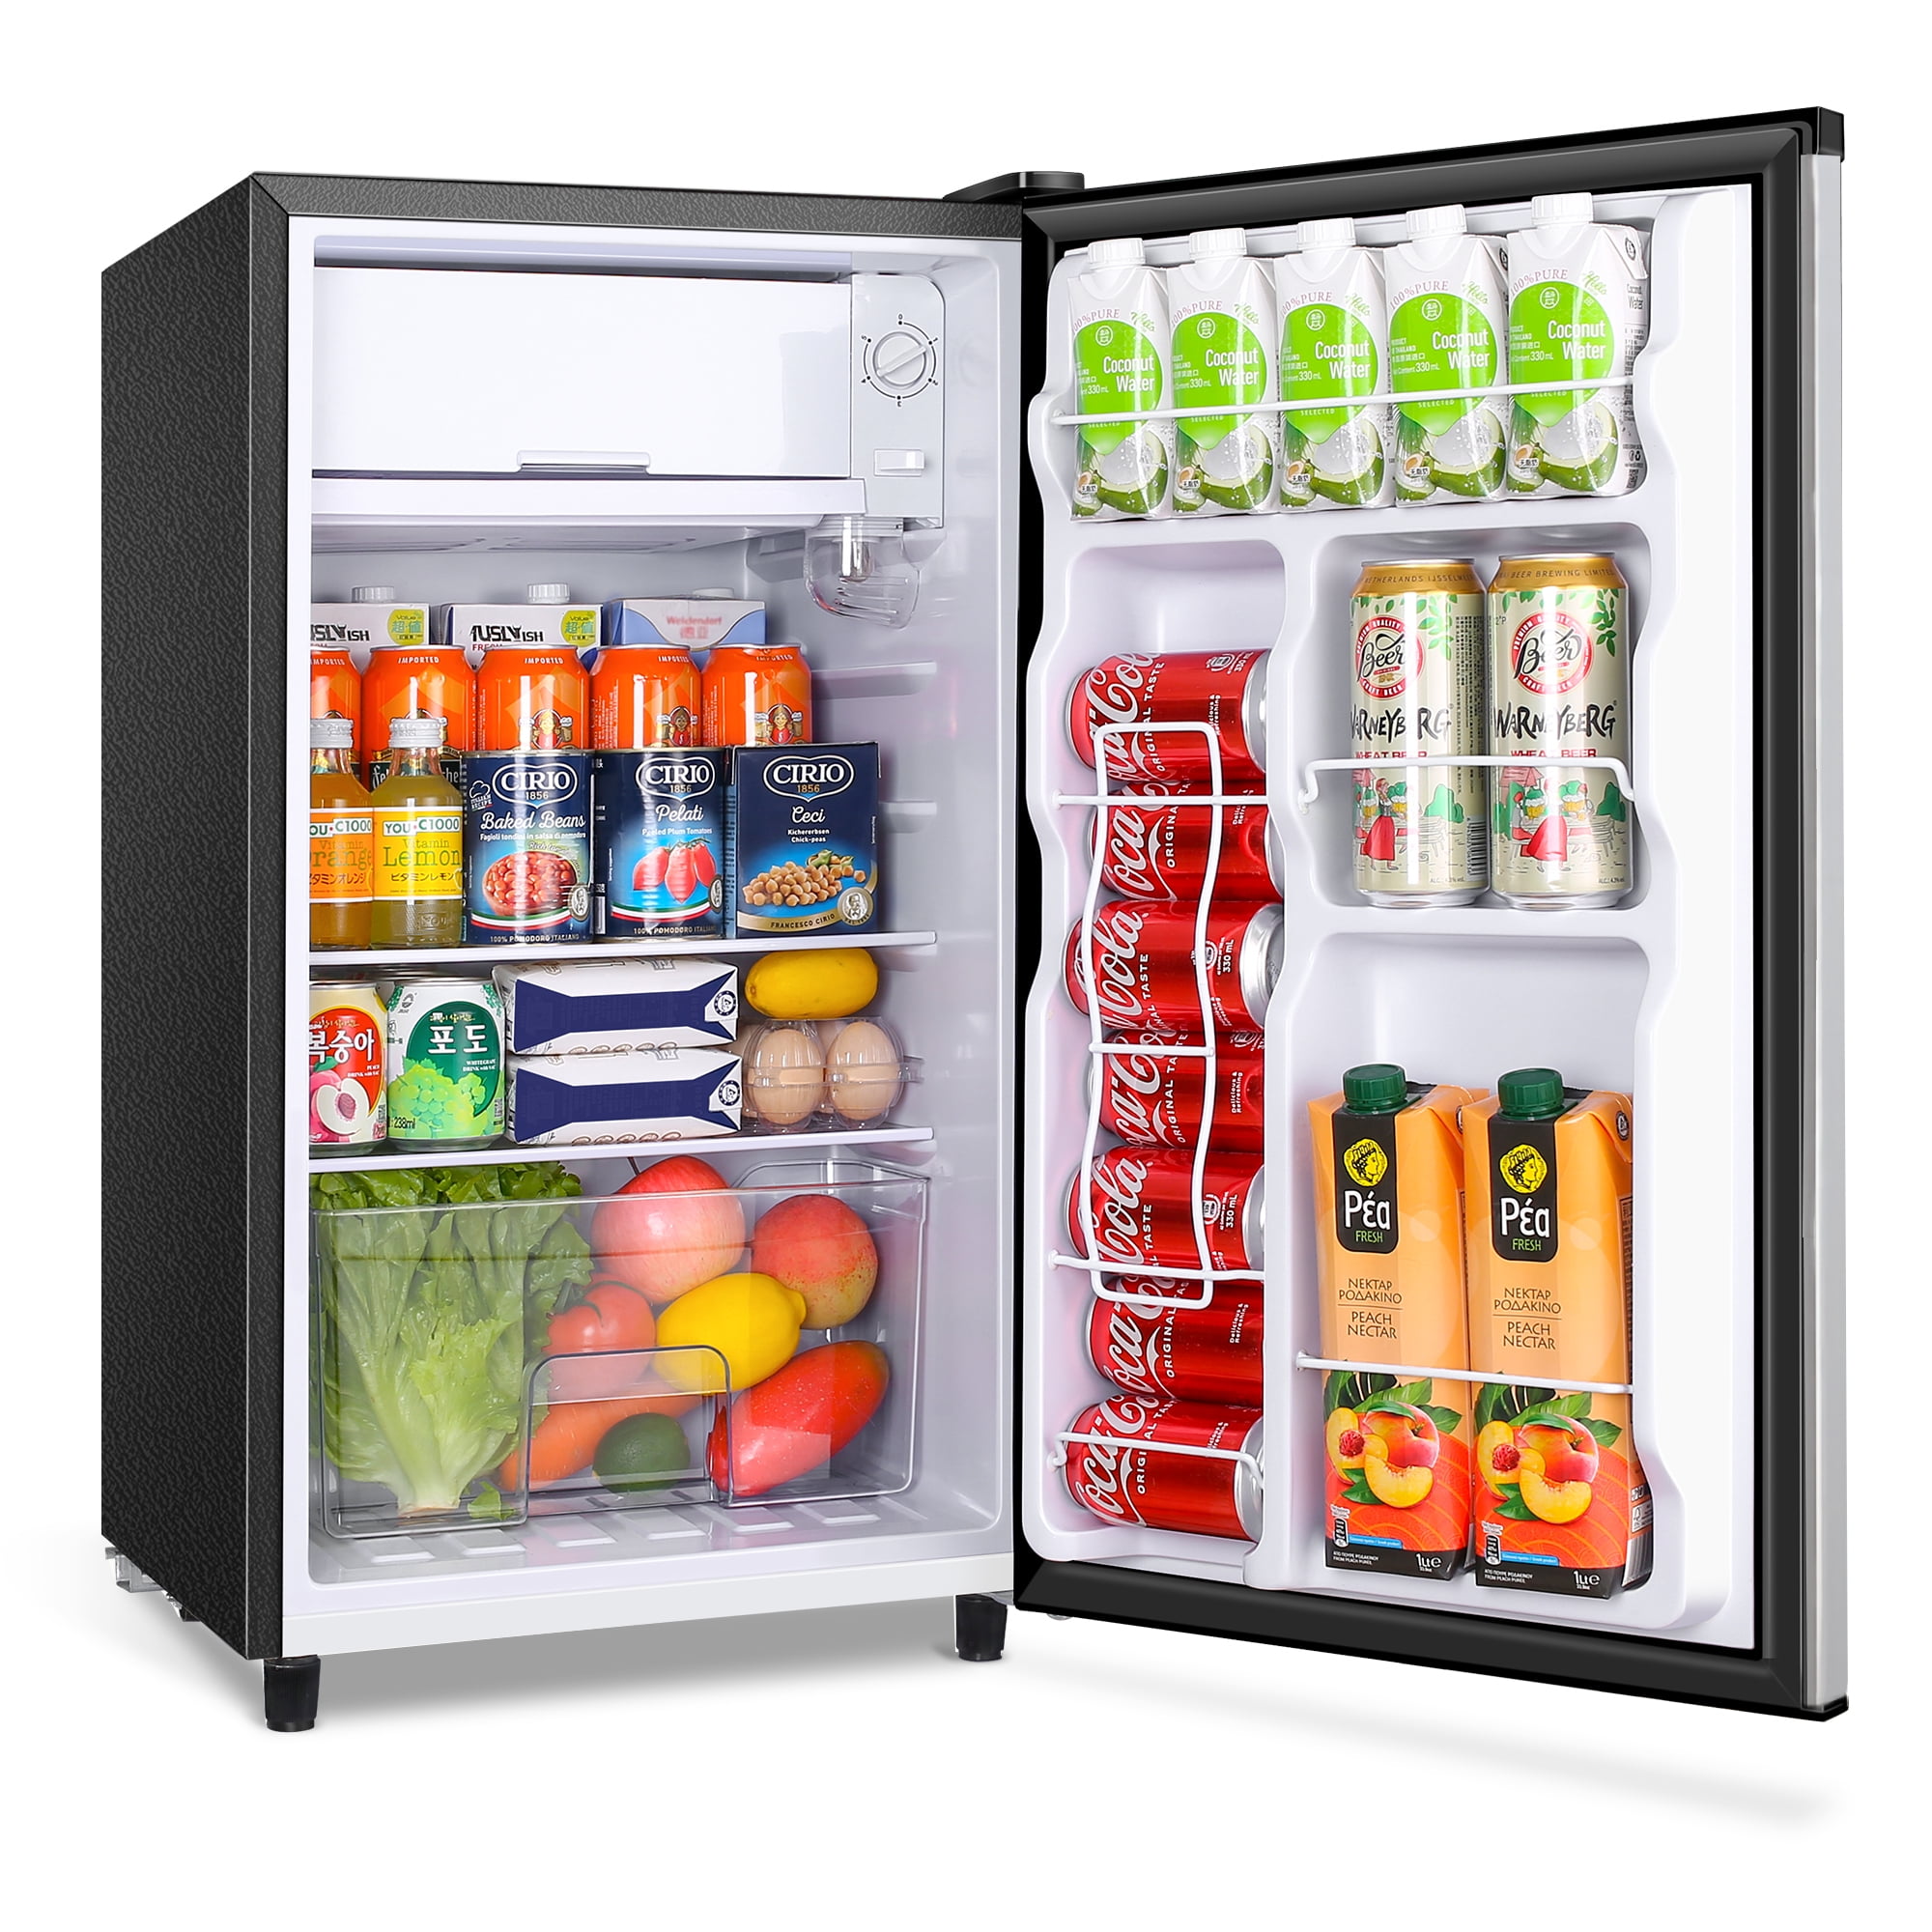 hOmeLabs Mini Fridge - 2.4 Cubic Feet Under Counter Refrigerator with Small  Freezer - Drinks Healthy Snacks Beer Storage for Office, Dorm or Apartment